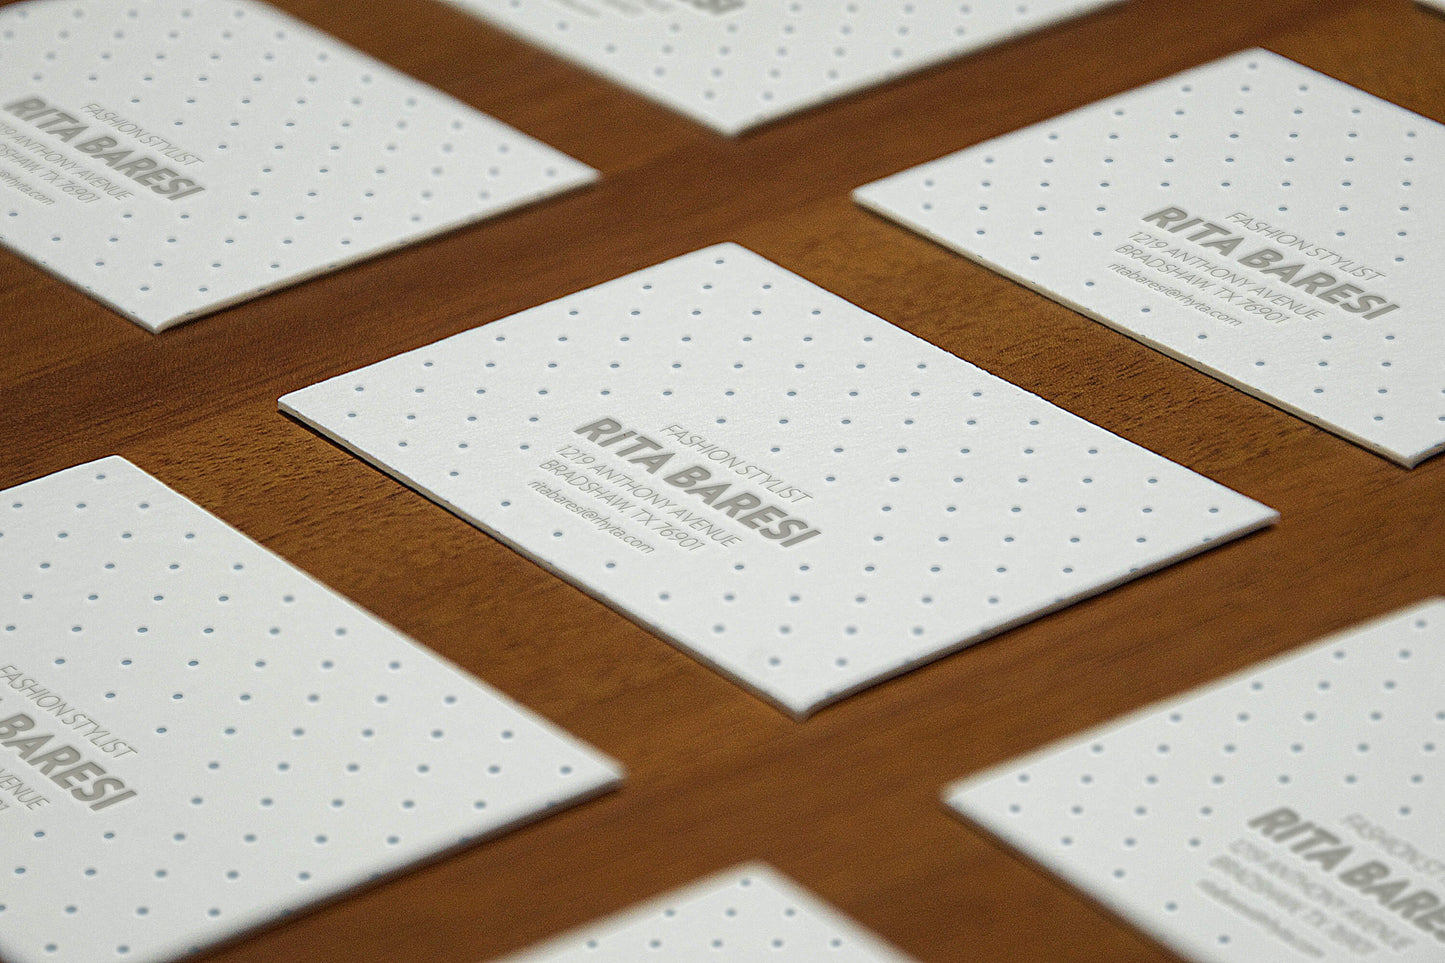 Free Perspective View of Business Cards Mockup on Wooden Surface